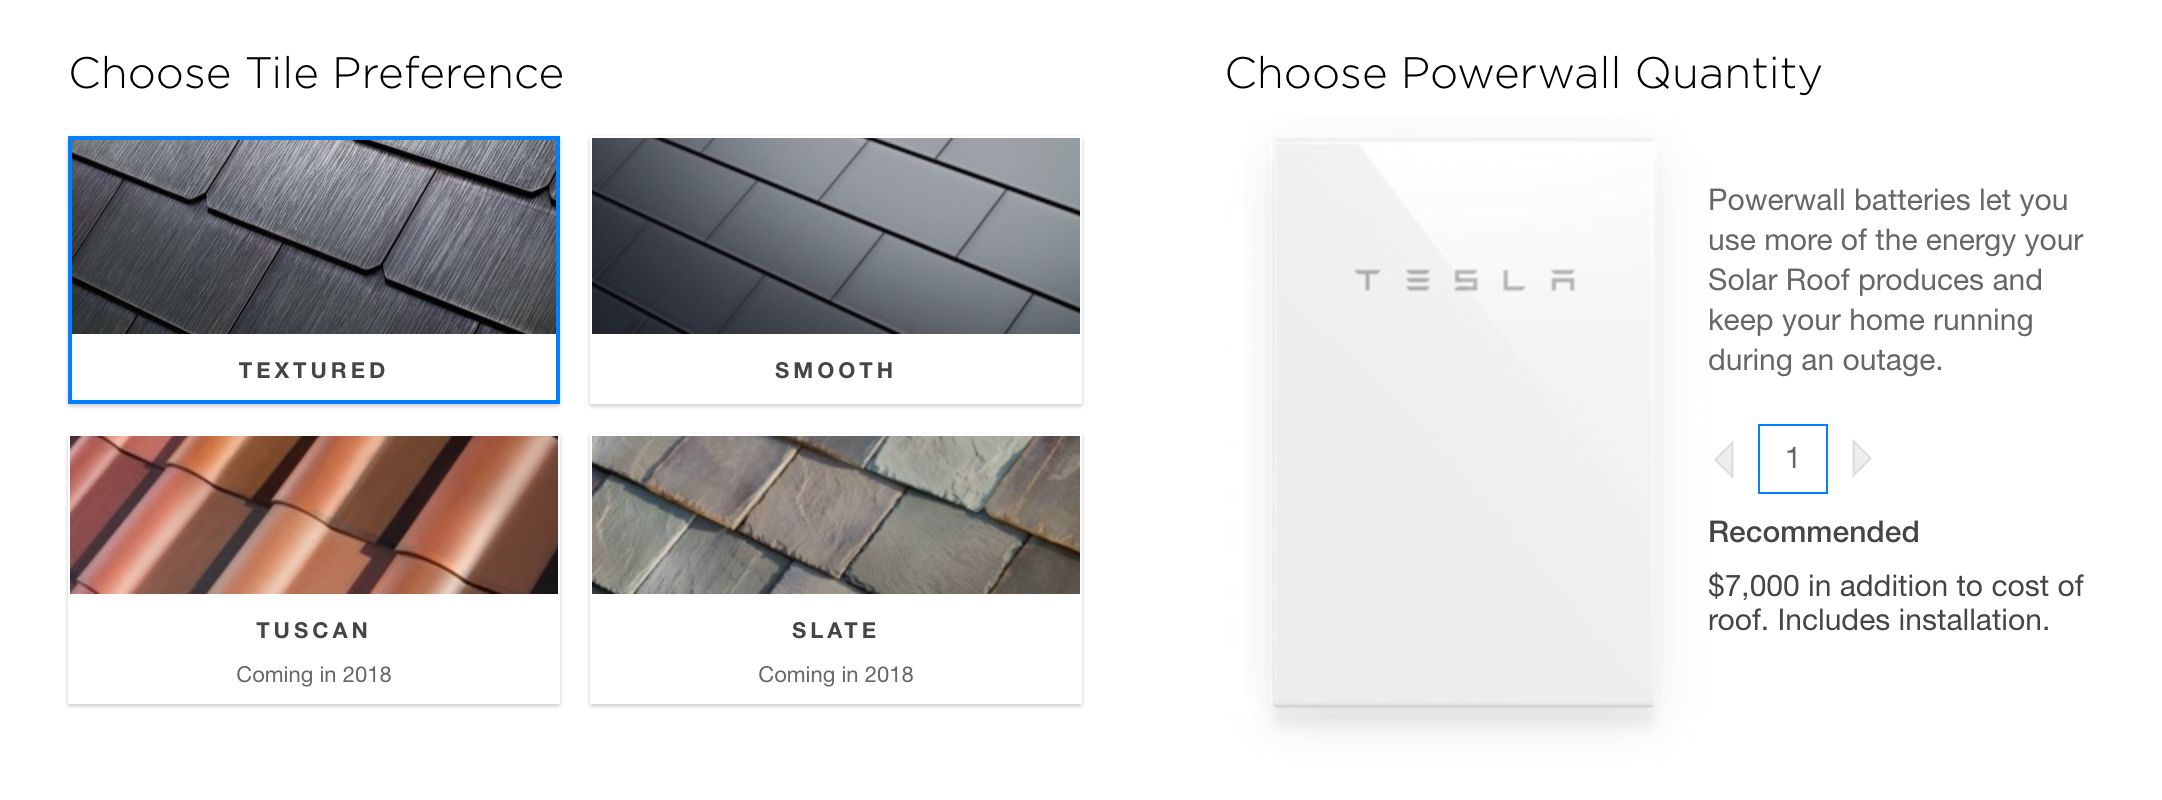 tesla solar roof tile preference and style